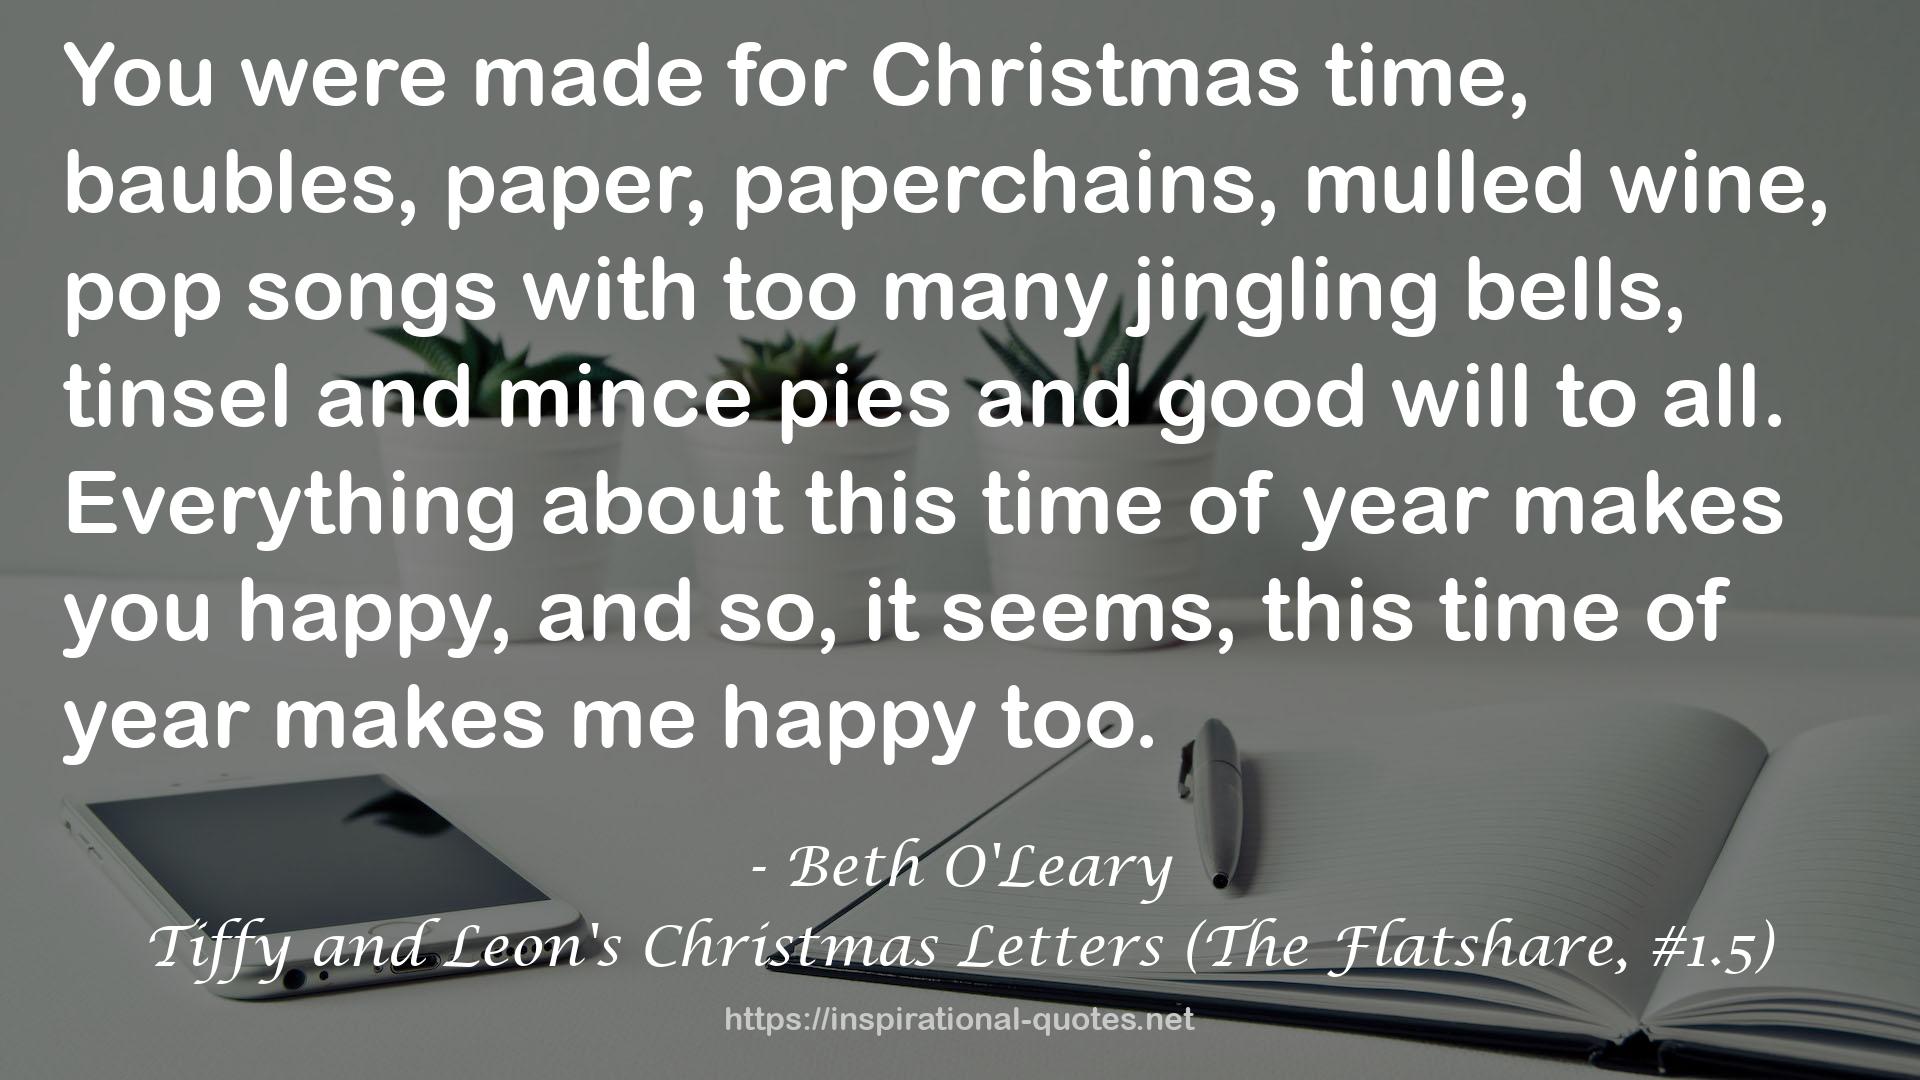 Tiffy and Leon's Christmas Letters (The Flatshare, #1.5) QUOTES